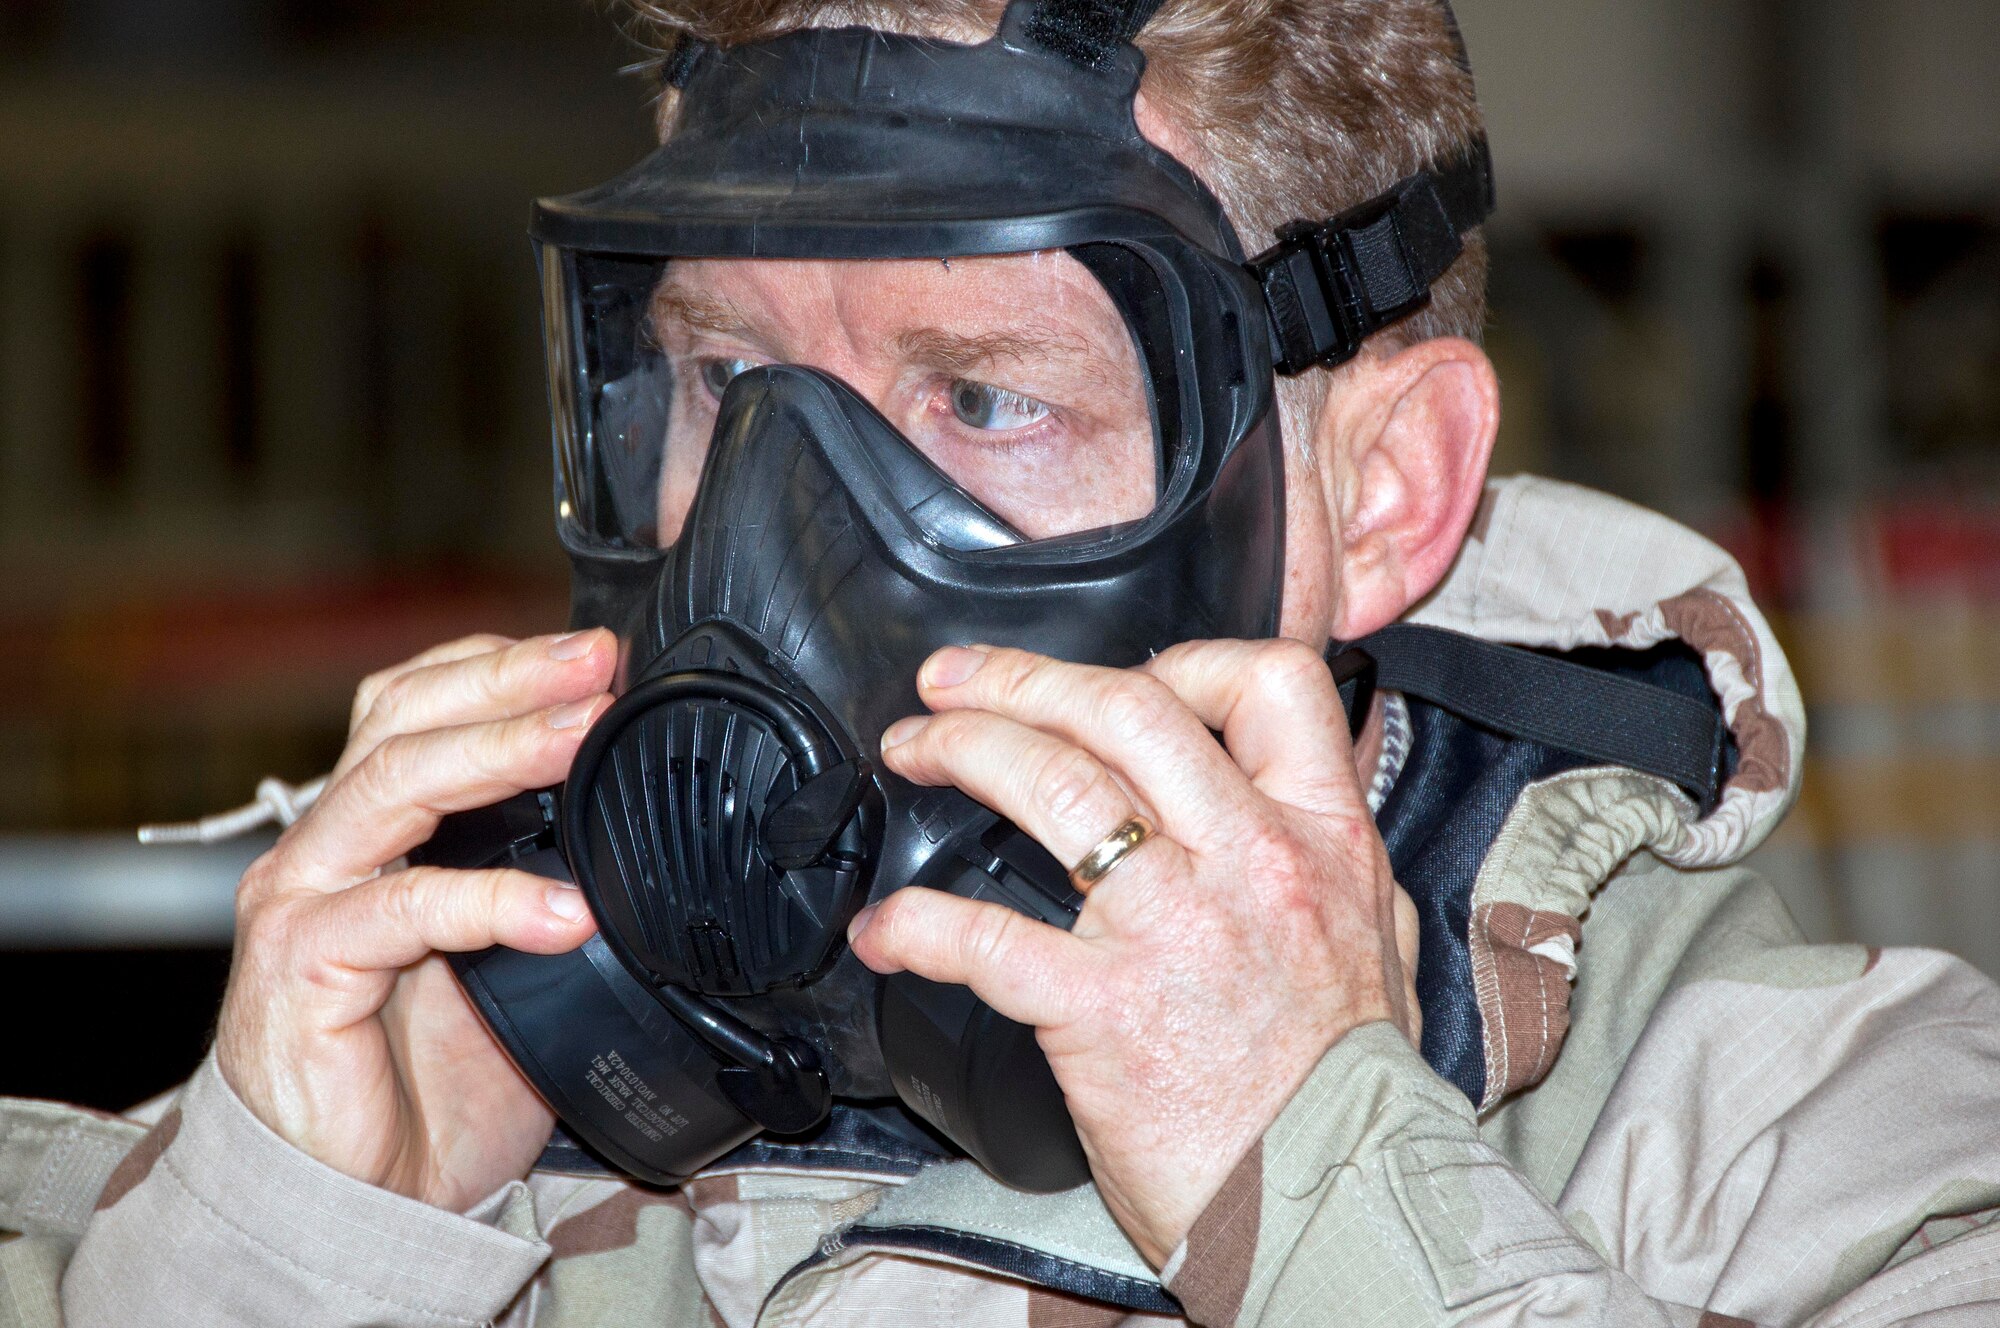 Ron Arnold, Puget Sound Naval Shipyard, dons an M-50 gas mask during deployment briefings on the 446th Airlift Wing's Employer Orientation Day held March 31 here.  More than 30 civilian employers of 446th AW's members participated in the event. (U.S. Air Force photo by Tech. Sgt. Tanya King)